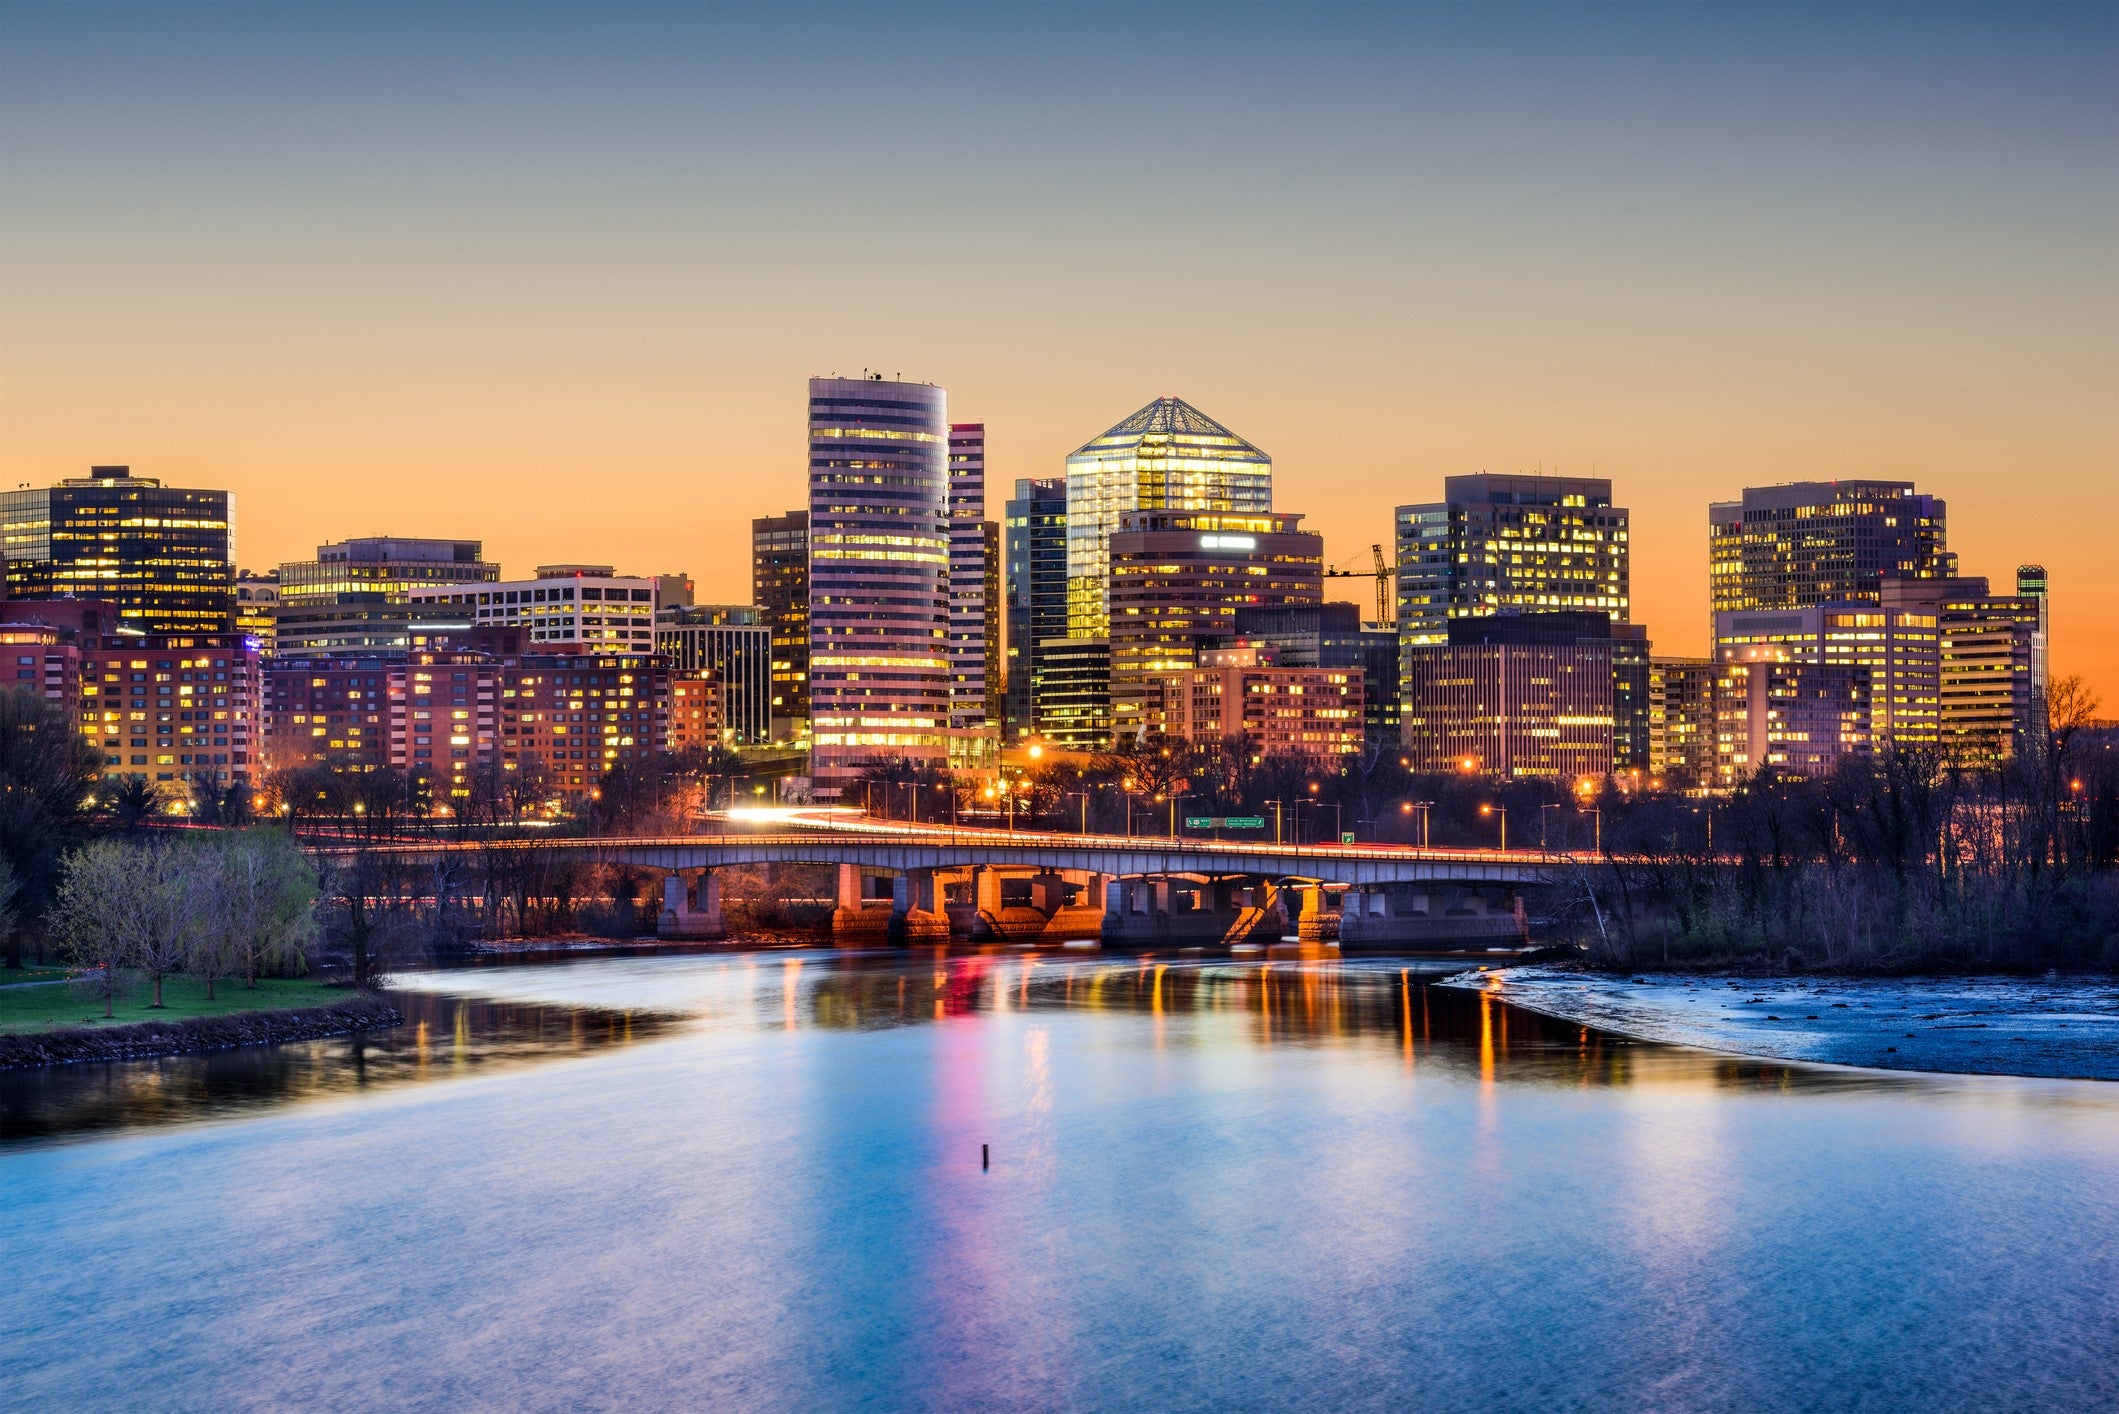 Cities including Arlington, Virginia, (pictured) have topped a top 10 list of places to move in the US based on livability.